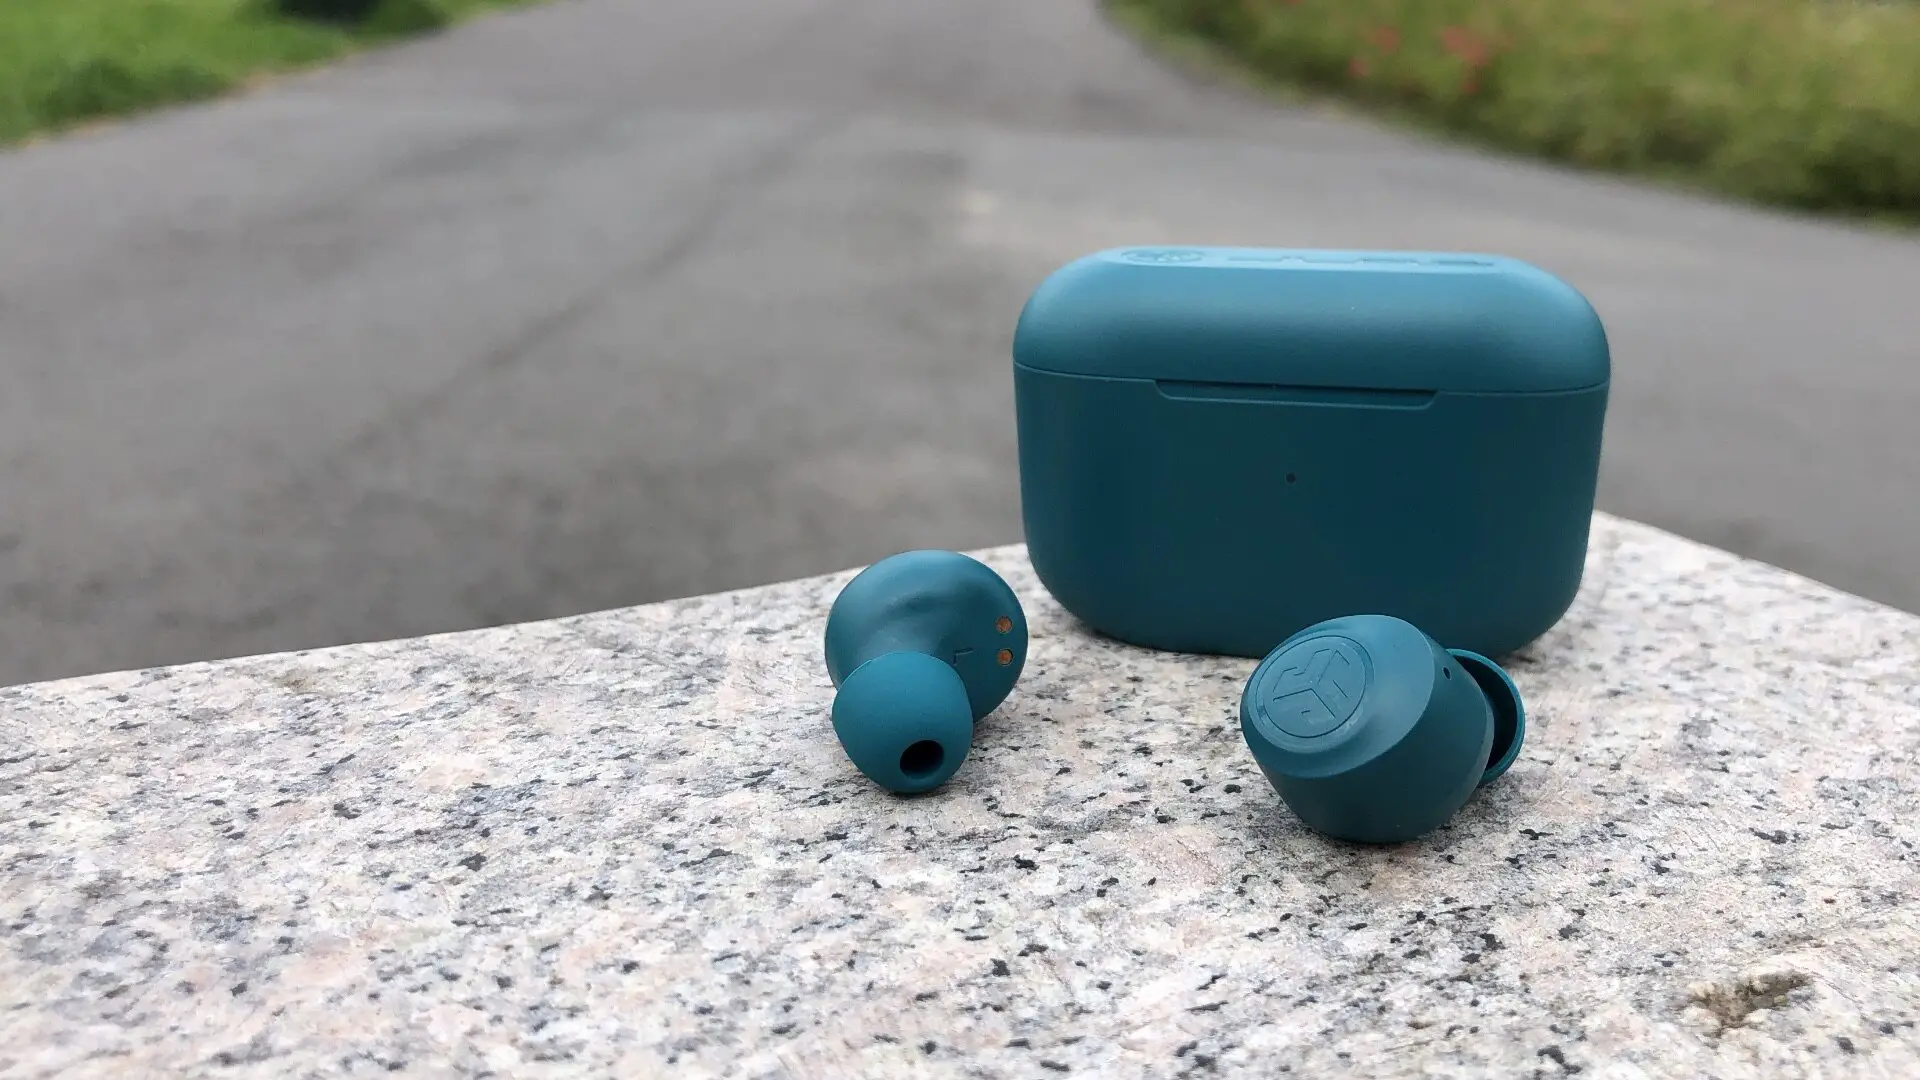 How to Use Jlab Go Air Pop Earbuds